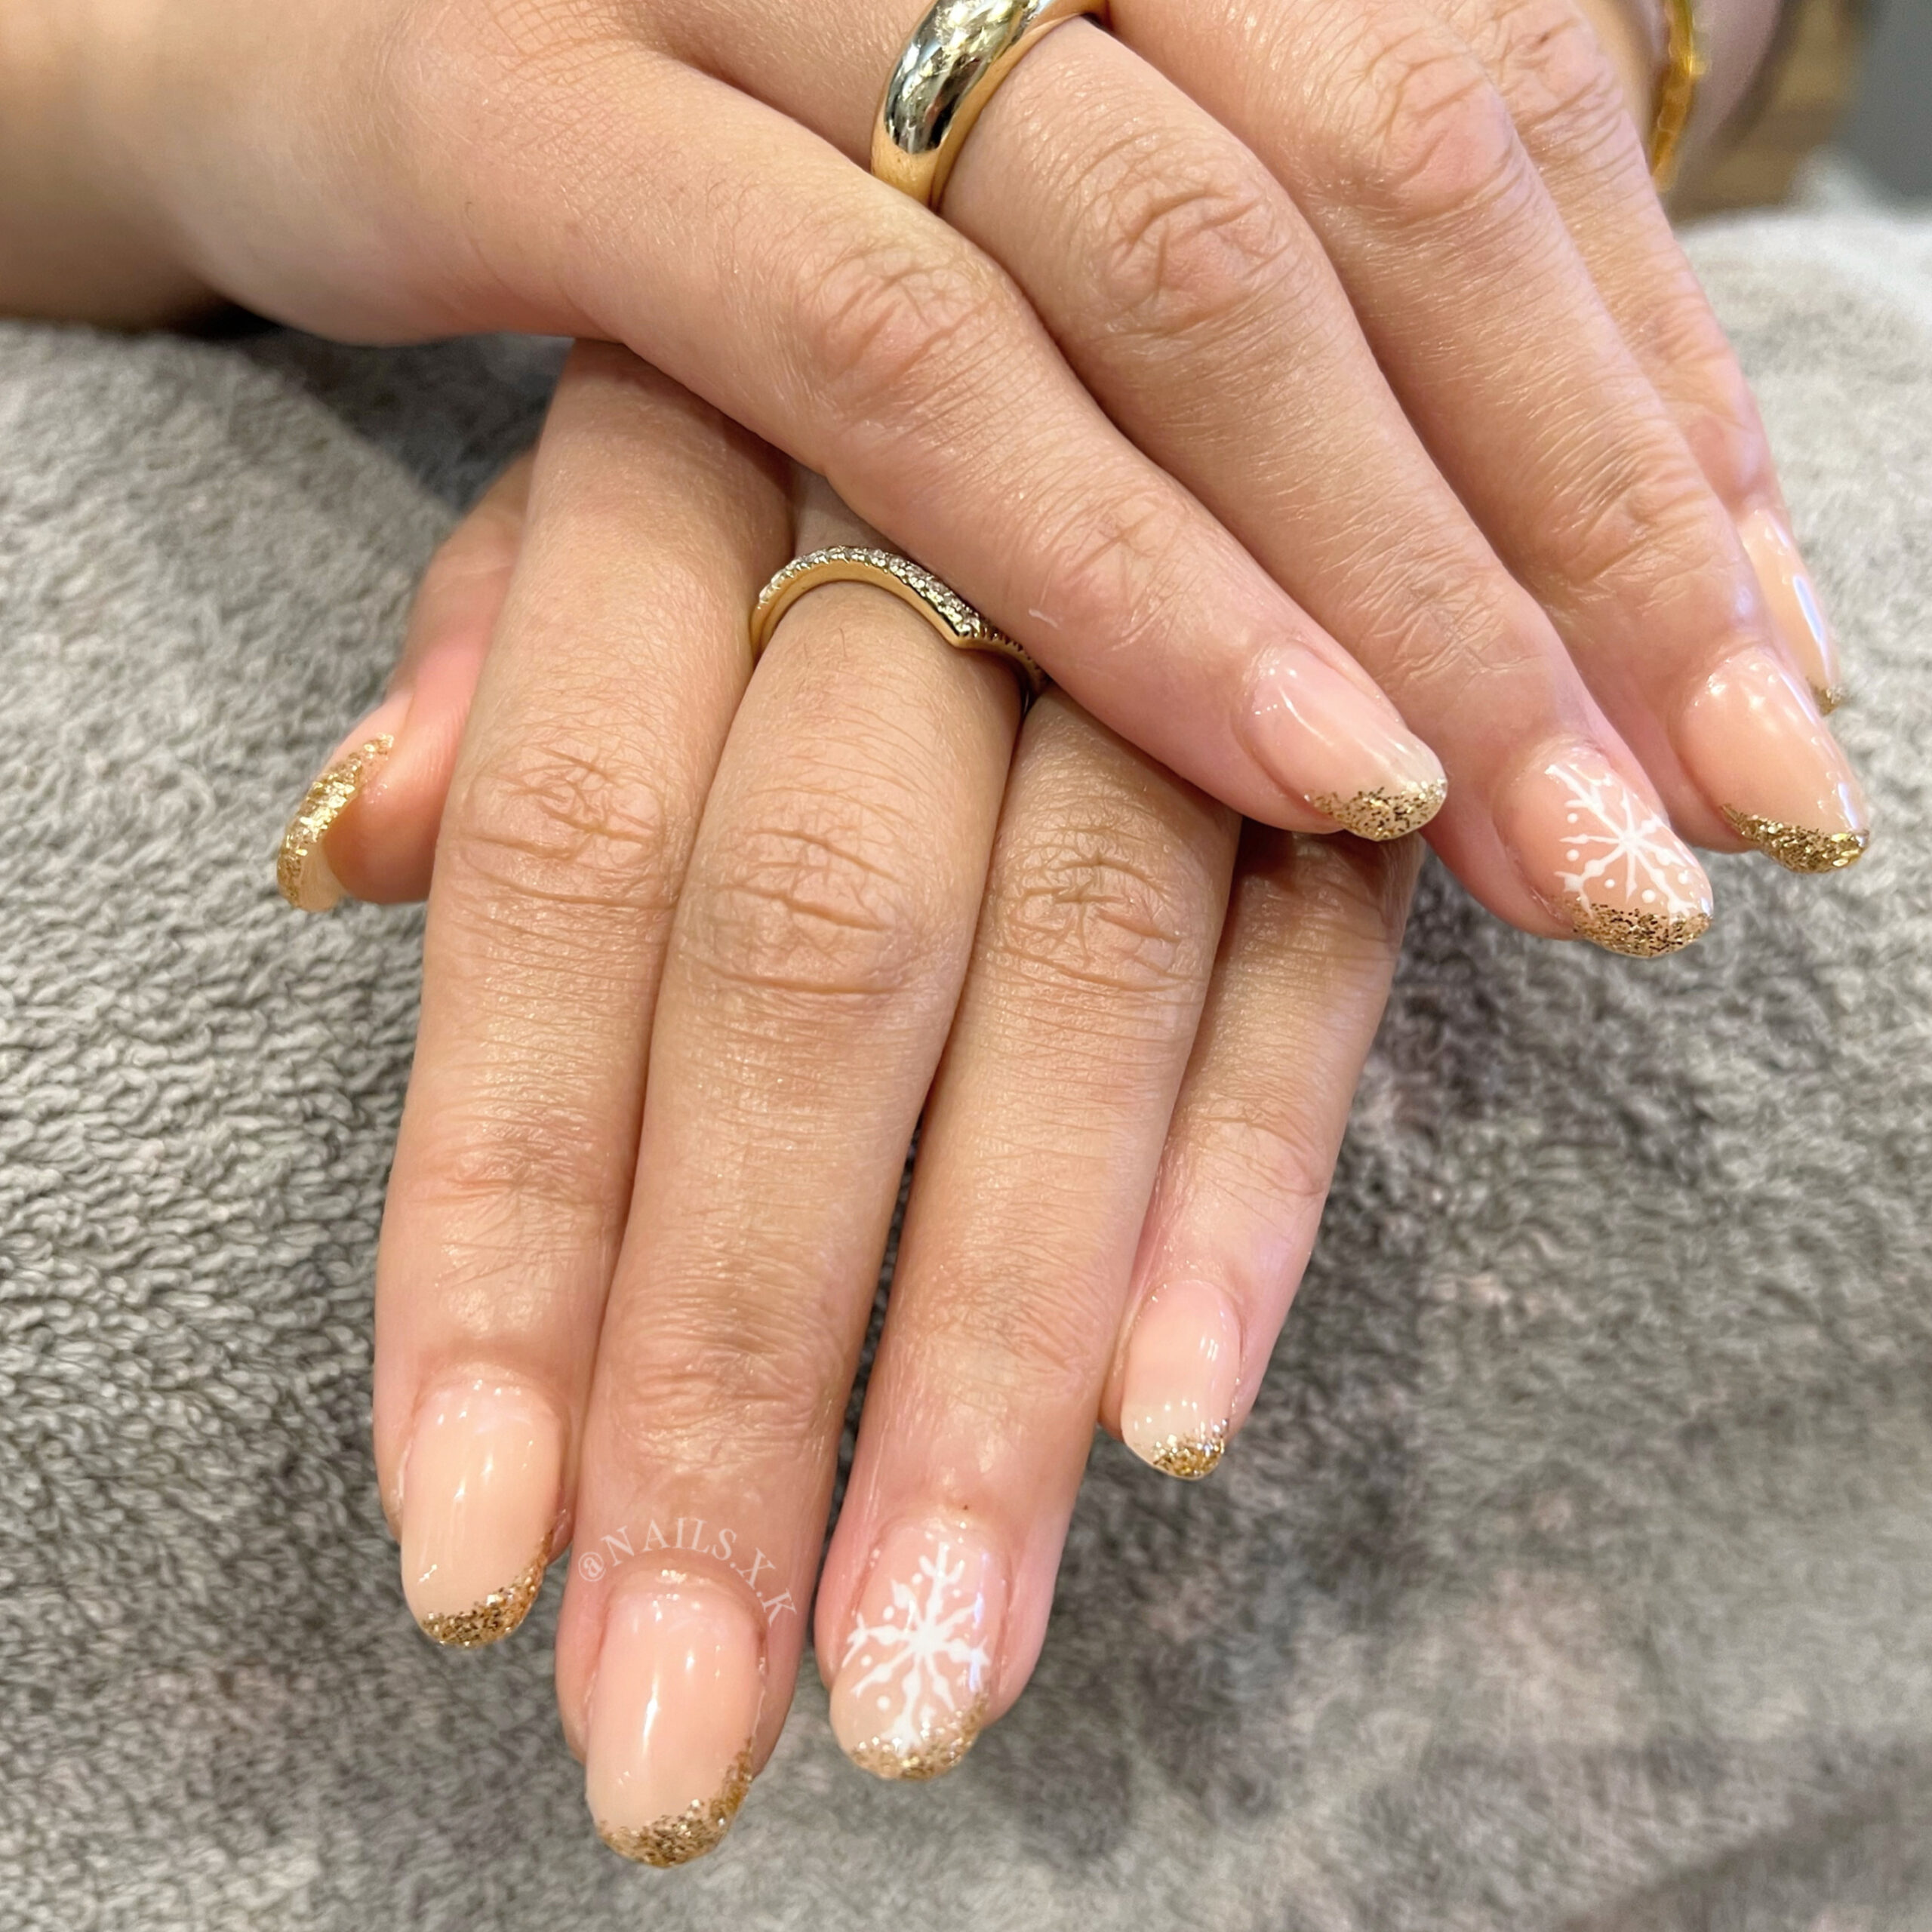 Short hard gel set with a half french gold glitter and snowflake accent designs. Nails by K